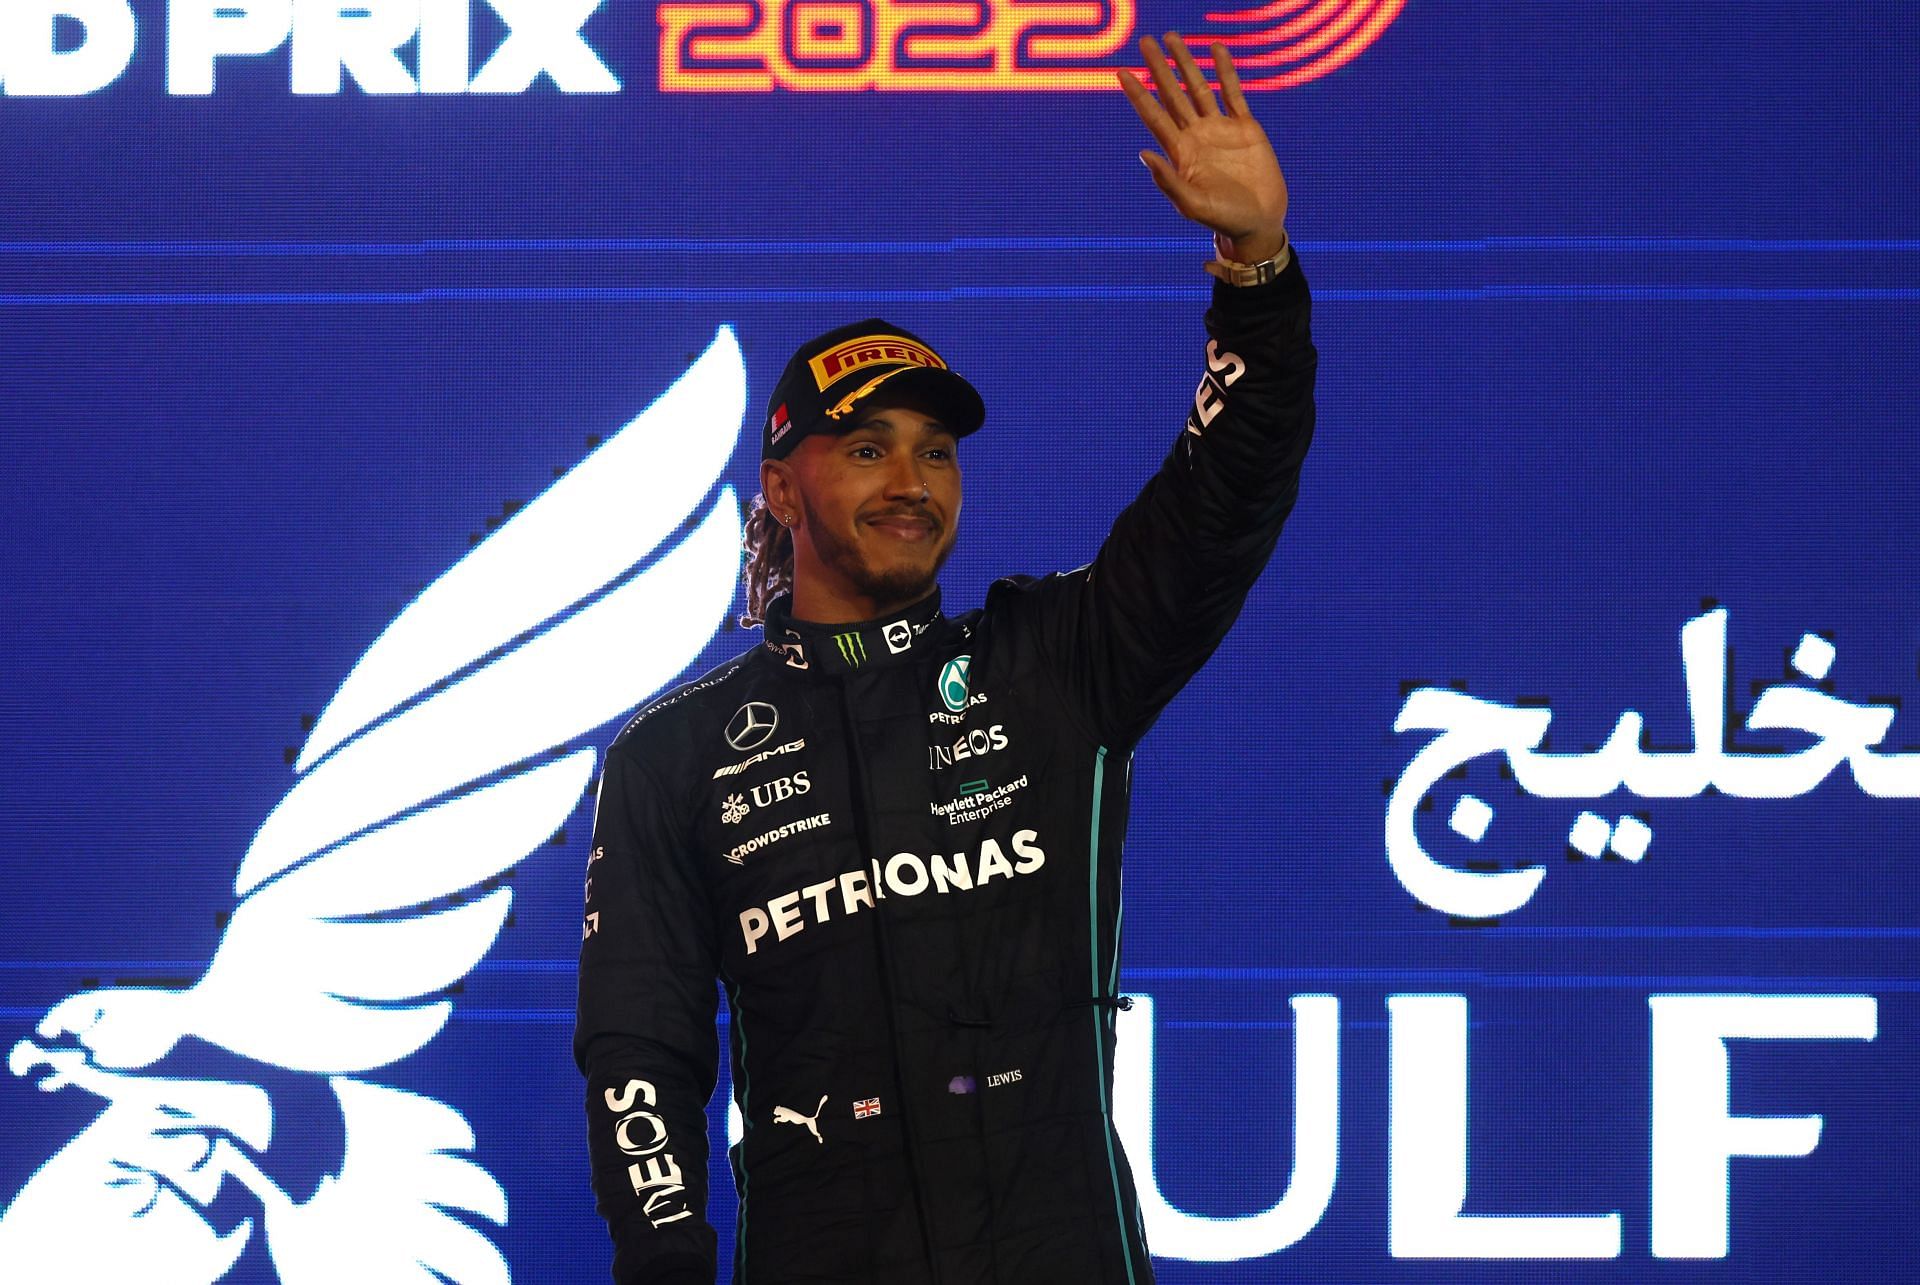 F1 Grand Prix of Bahrain - Lewis Hamilton celebrates after securing P3 in the race